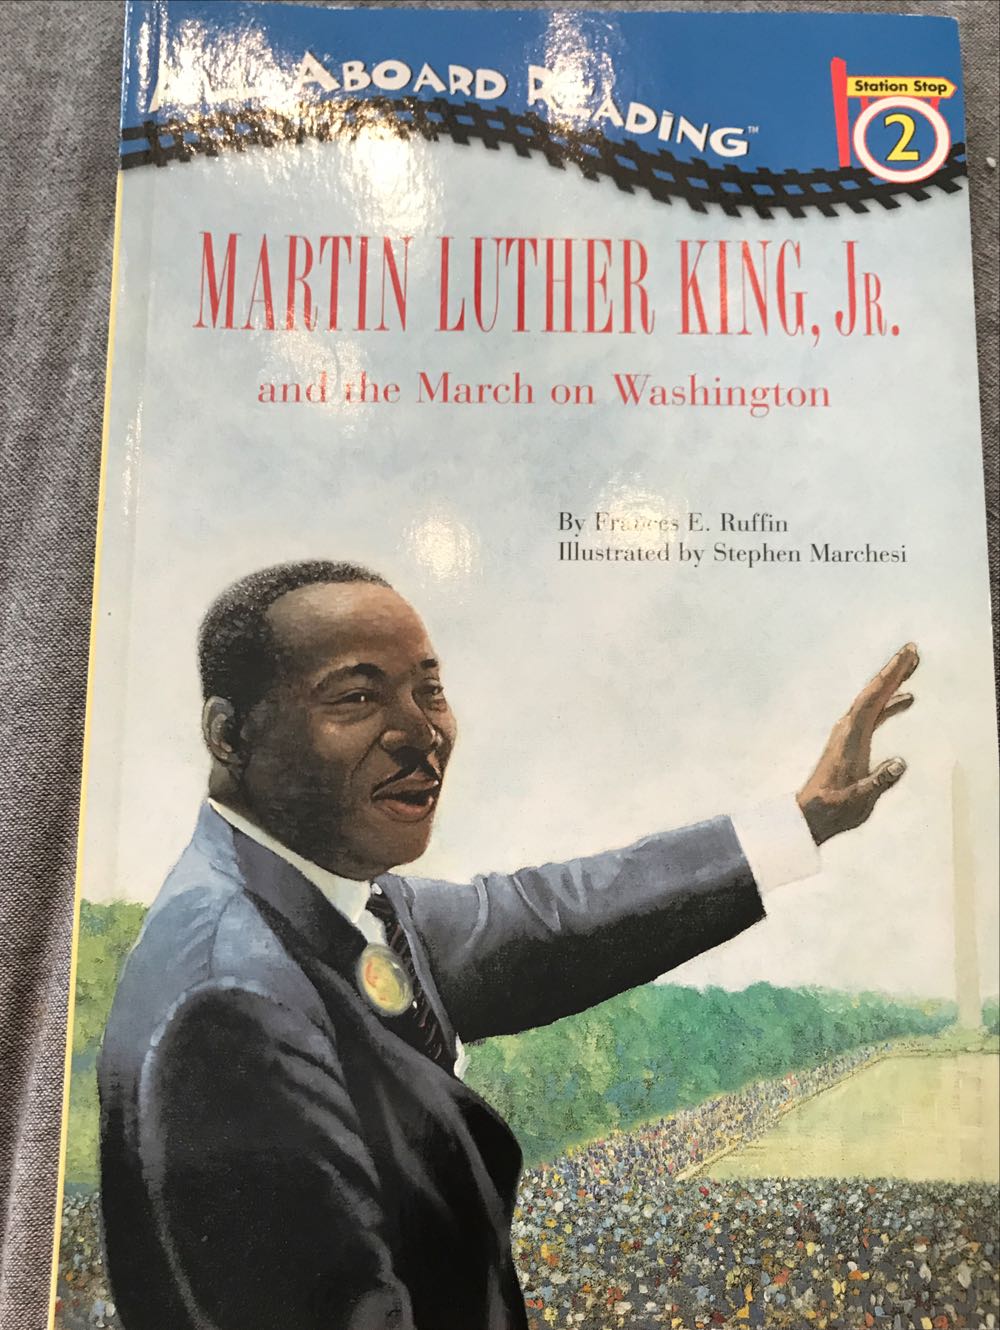 Martin Luther King, Jr. and the March on Washington - Frances E. Ruffin (Addison Wesley Publishing Company - Paperback) book collectible [Barcode 9780448424217] - Main Image 4